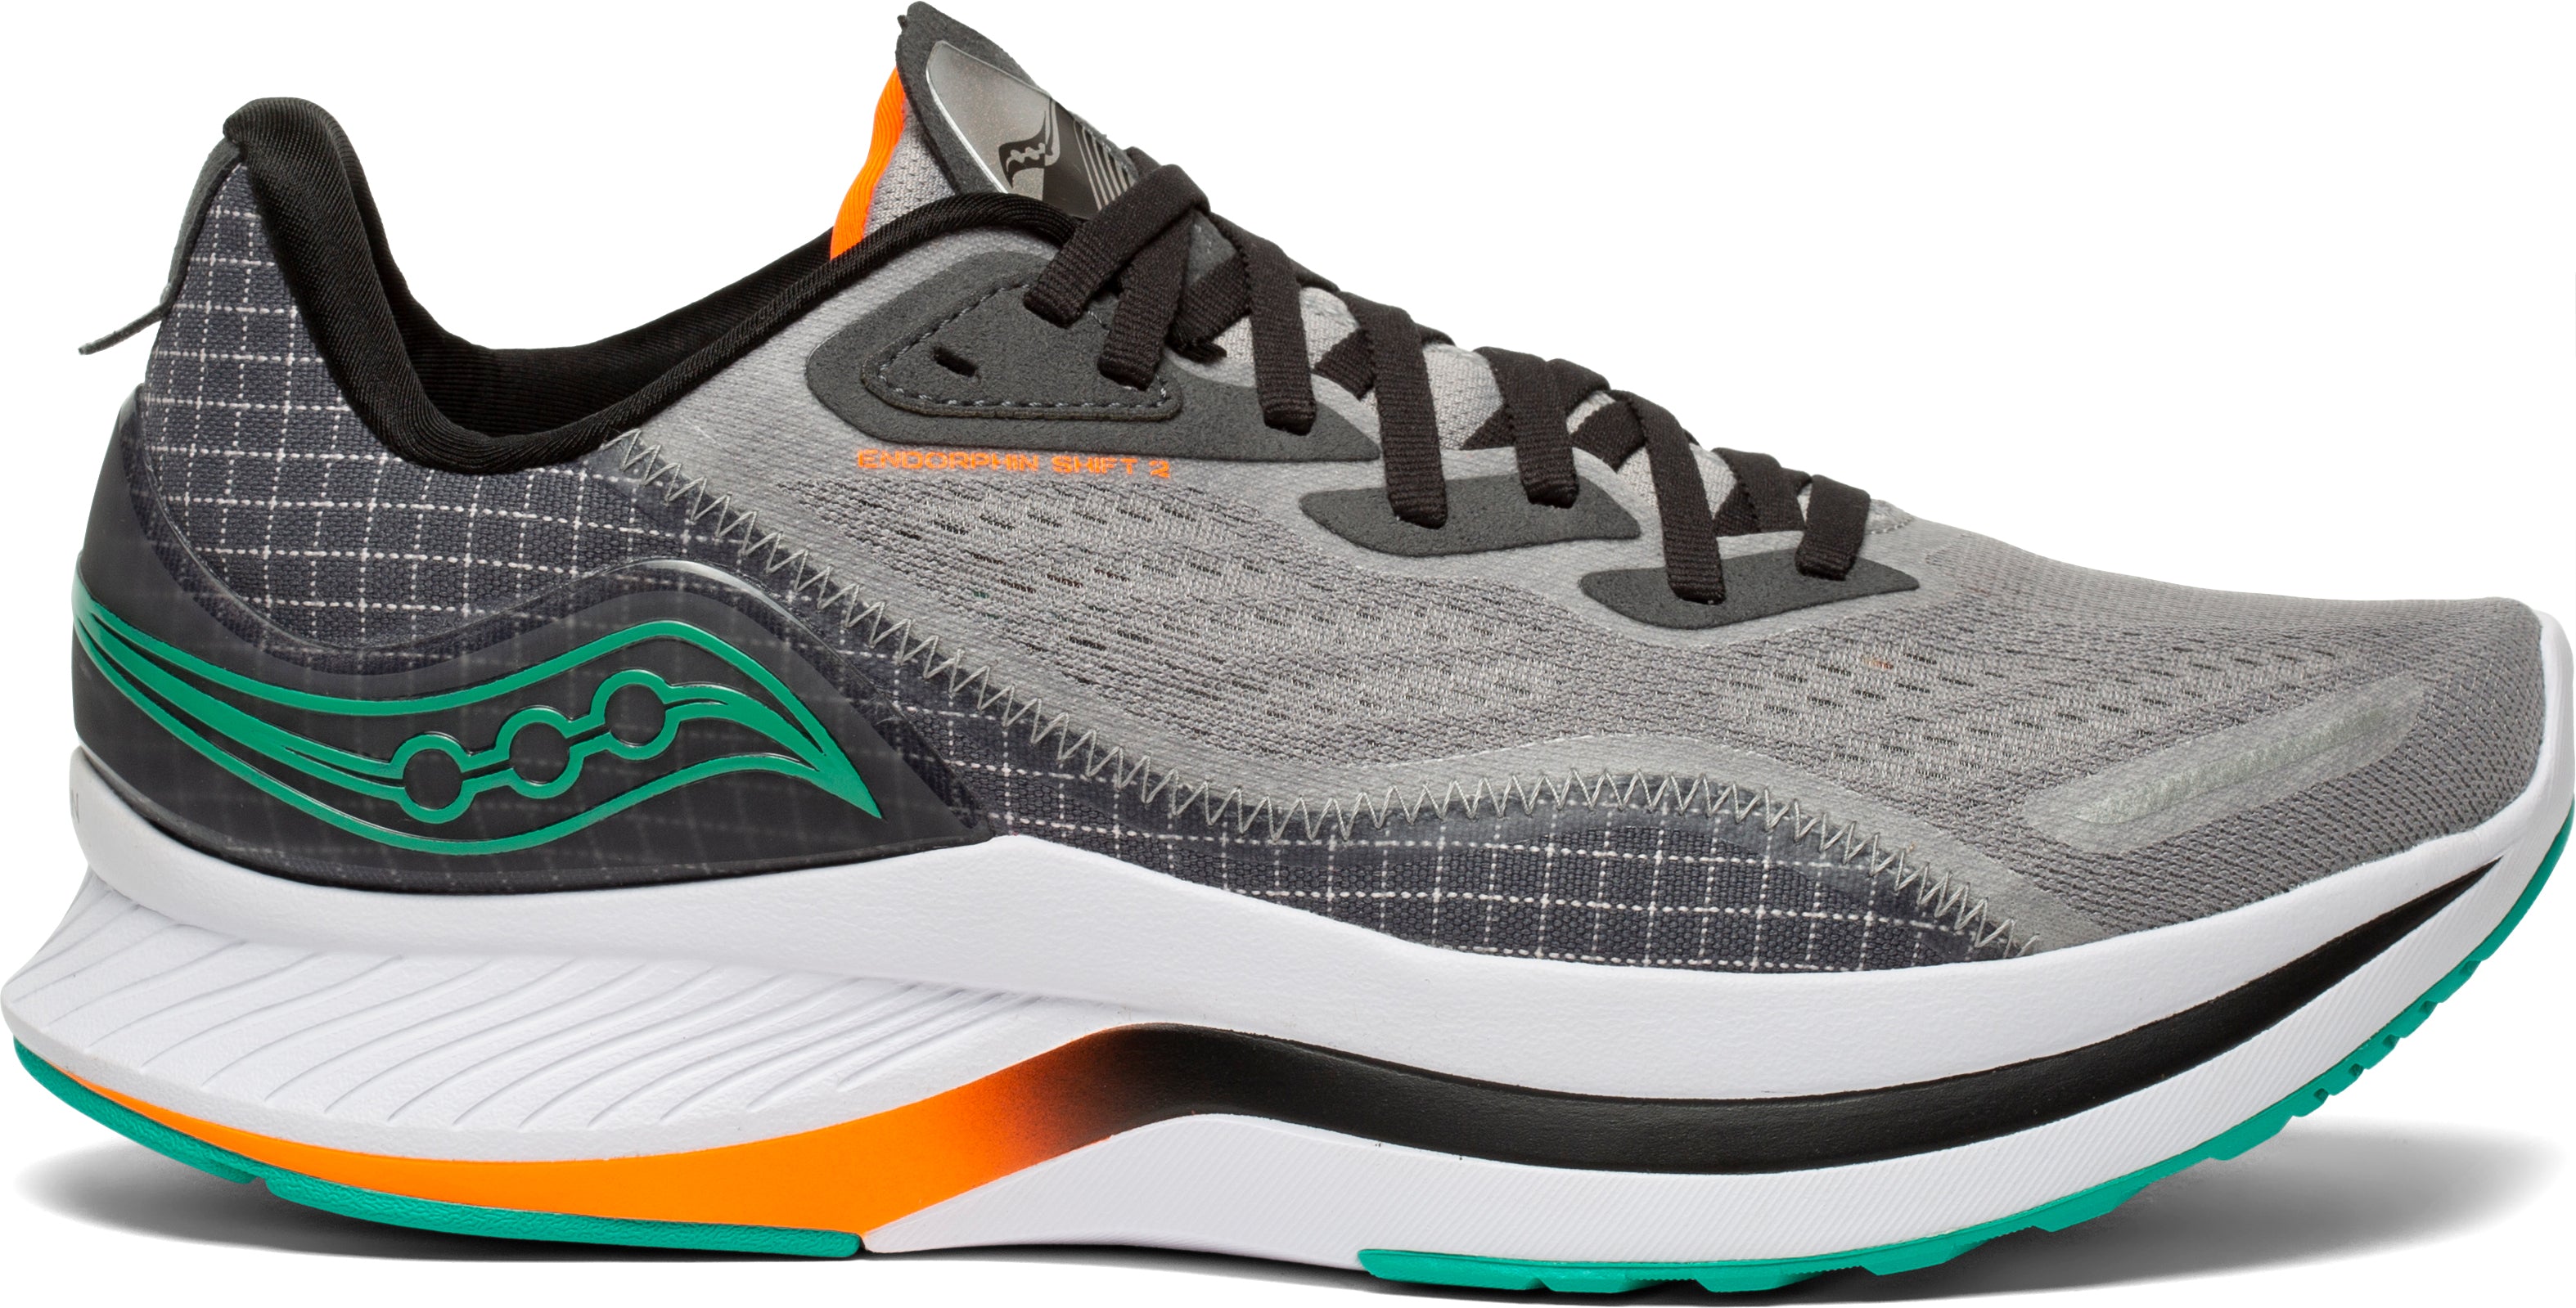 Saucony is certainly on to something with the Men's Endorphin Shift 2.  It is the definition of effortless performance. It mixes a lofty bed of super soft cushioning with propulsive Speedroll Technology that quickly moves the body into the next step, especially reducing the time the foot is on the ground and reducing the gait cycle.